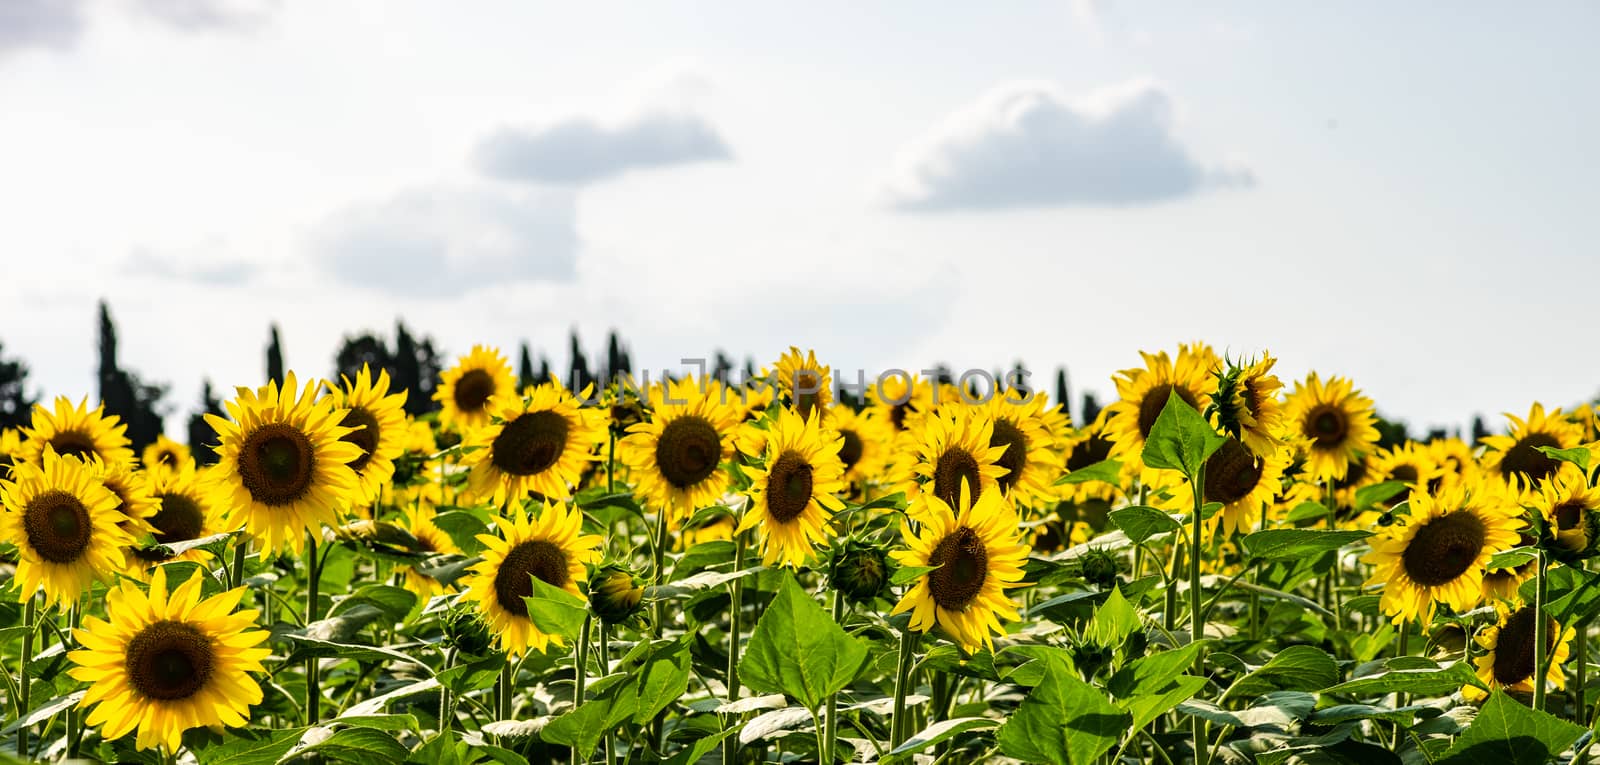 Blooming sunflowers in a field  by Elet